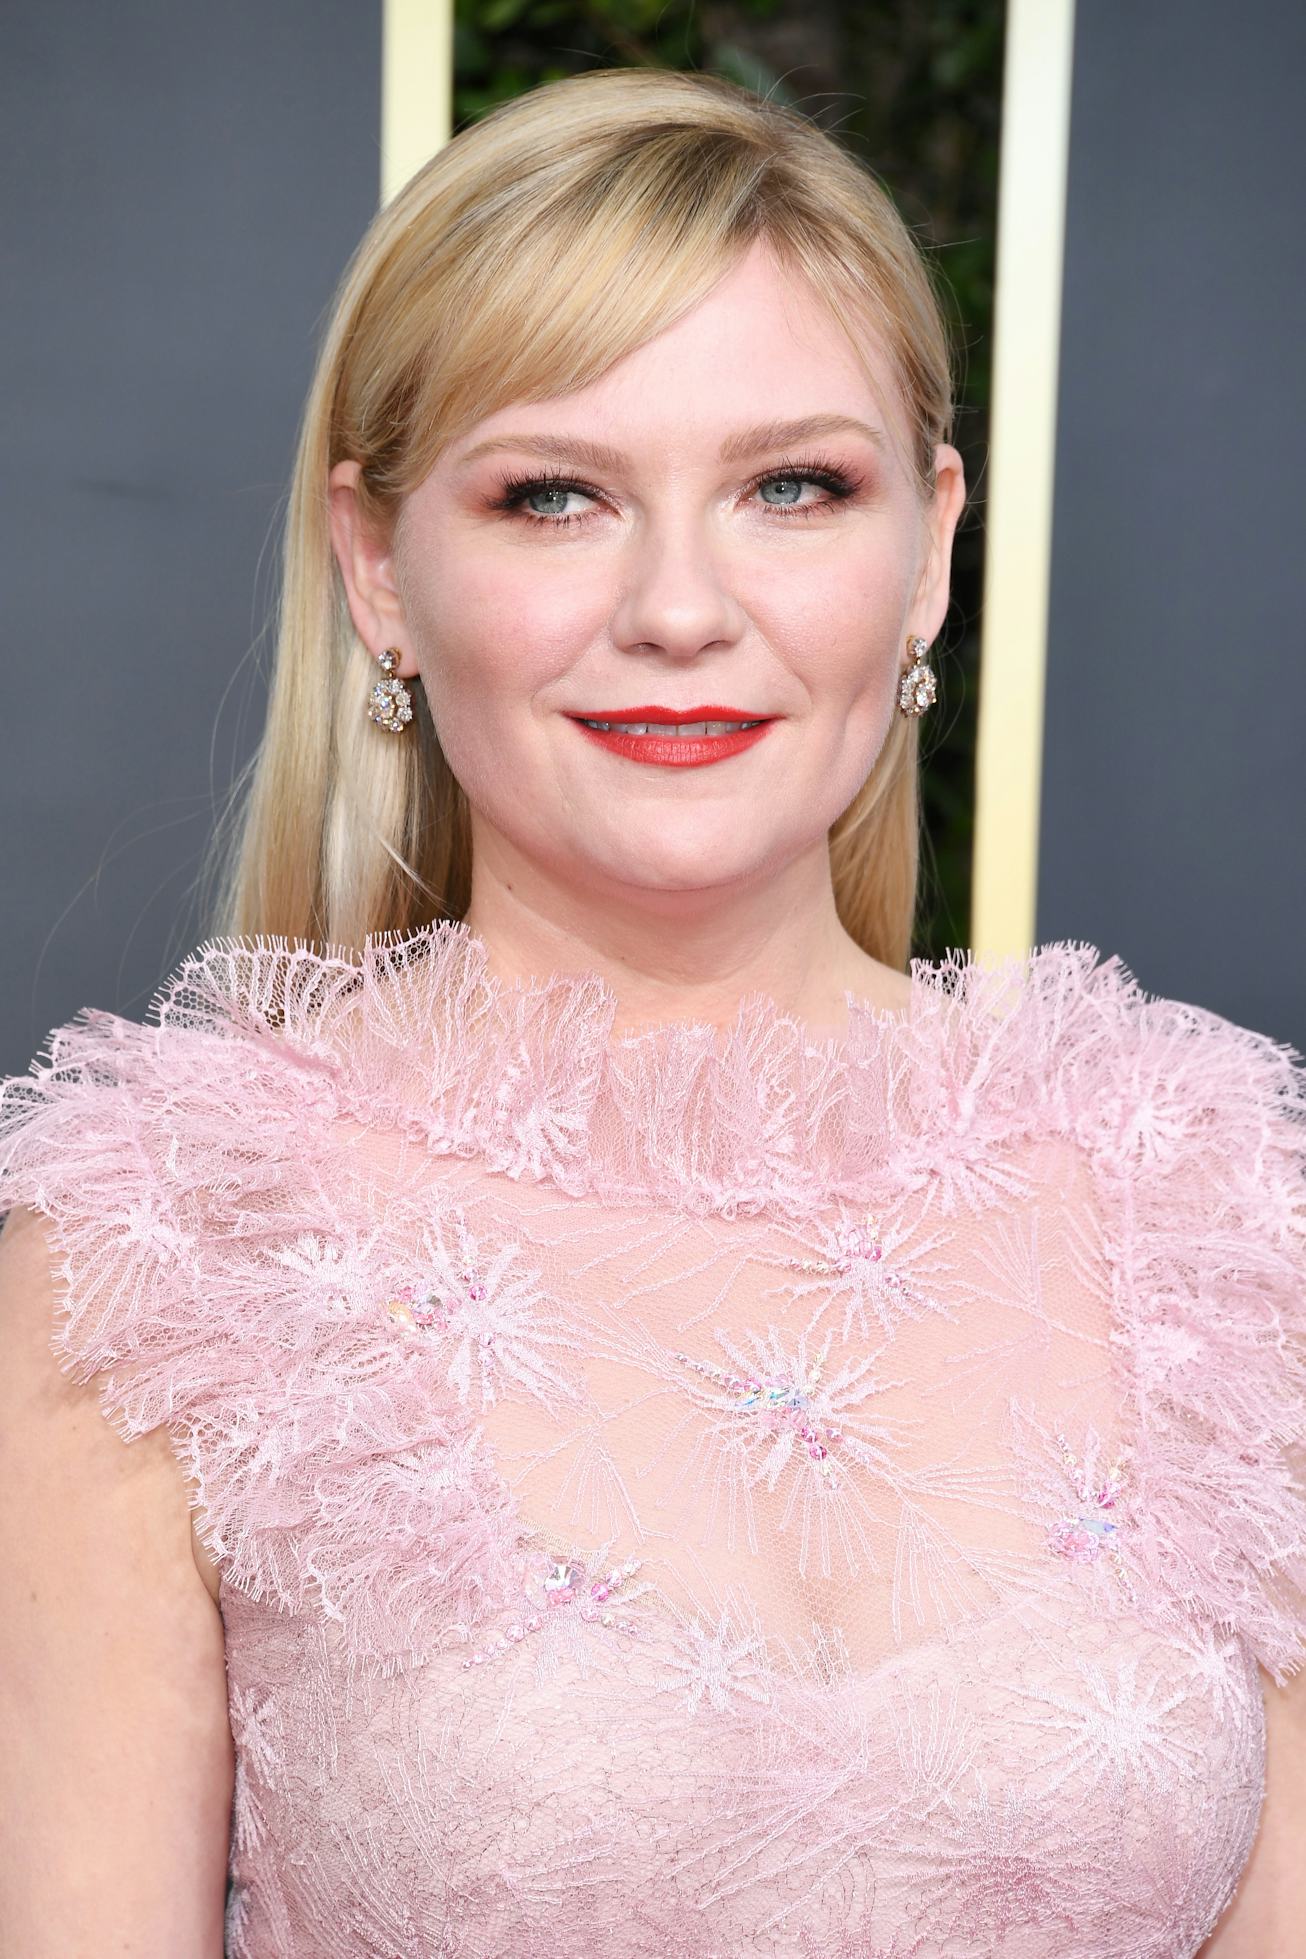 Kirsten Dunst announced her second pregnancy with partner Jesse Plemmons.